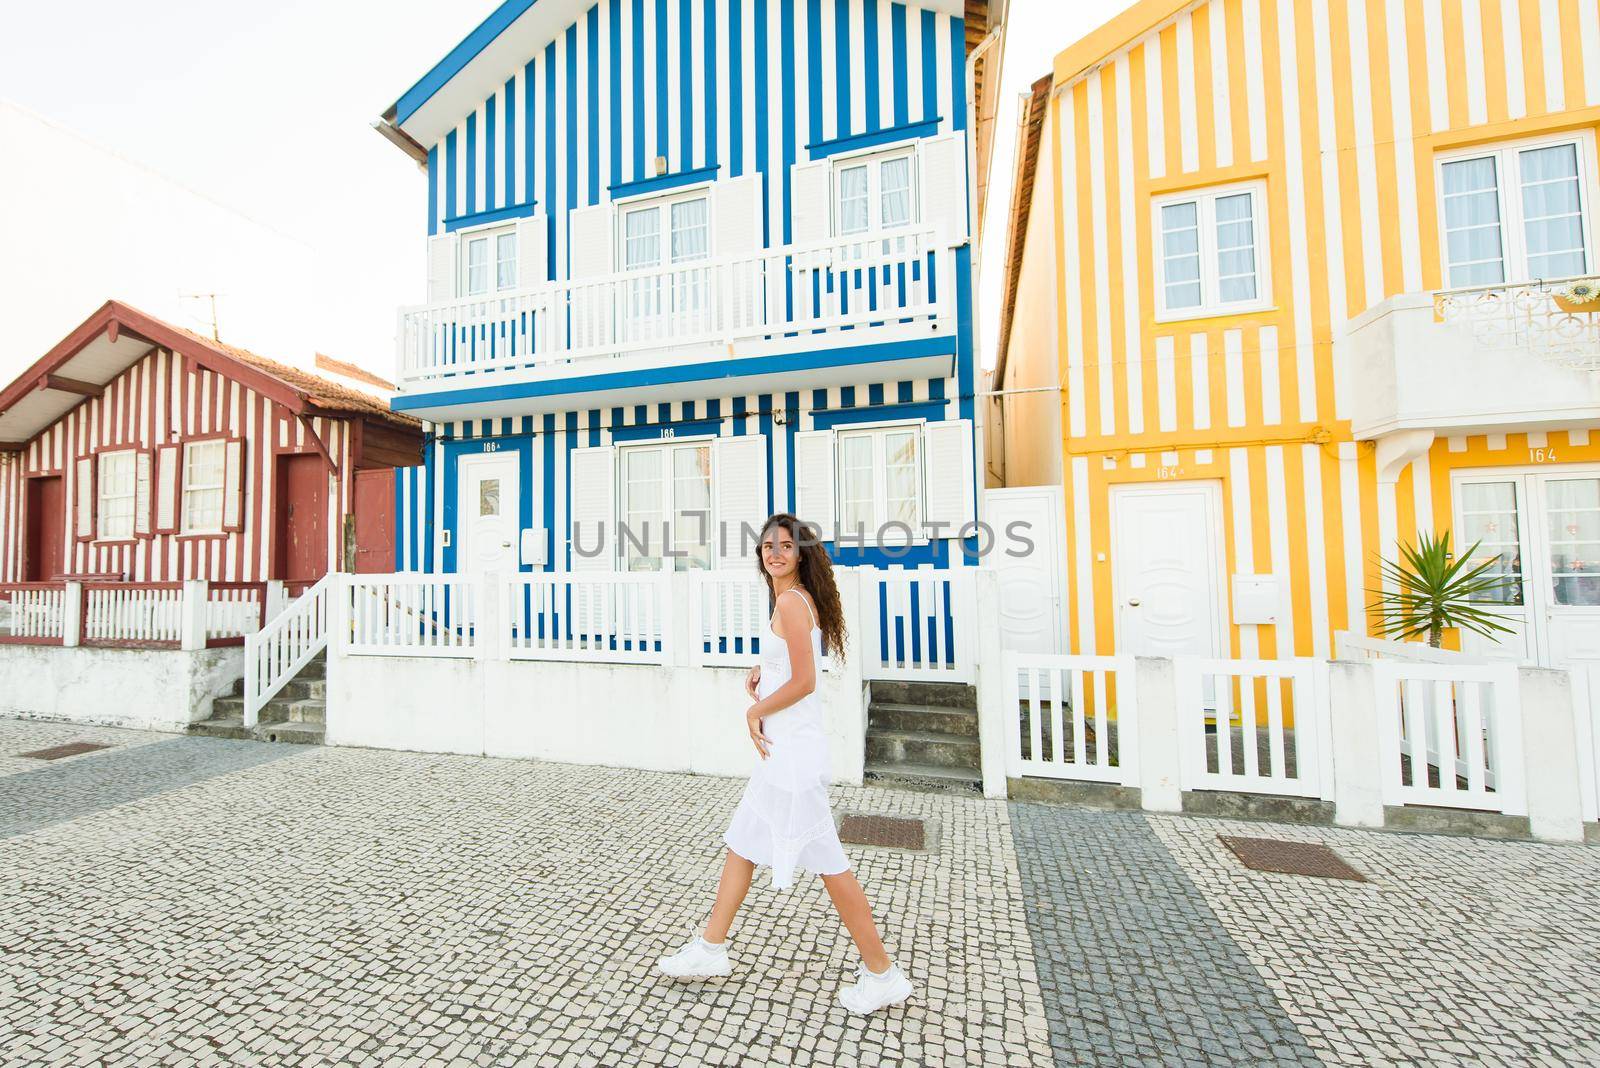 Young girl in white dress walks around street in Aveiro, Portugal near colourful and peaceful houses. Lifestyle by Rabizo